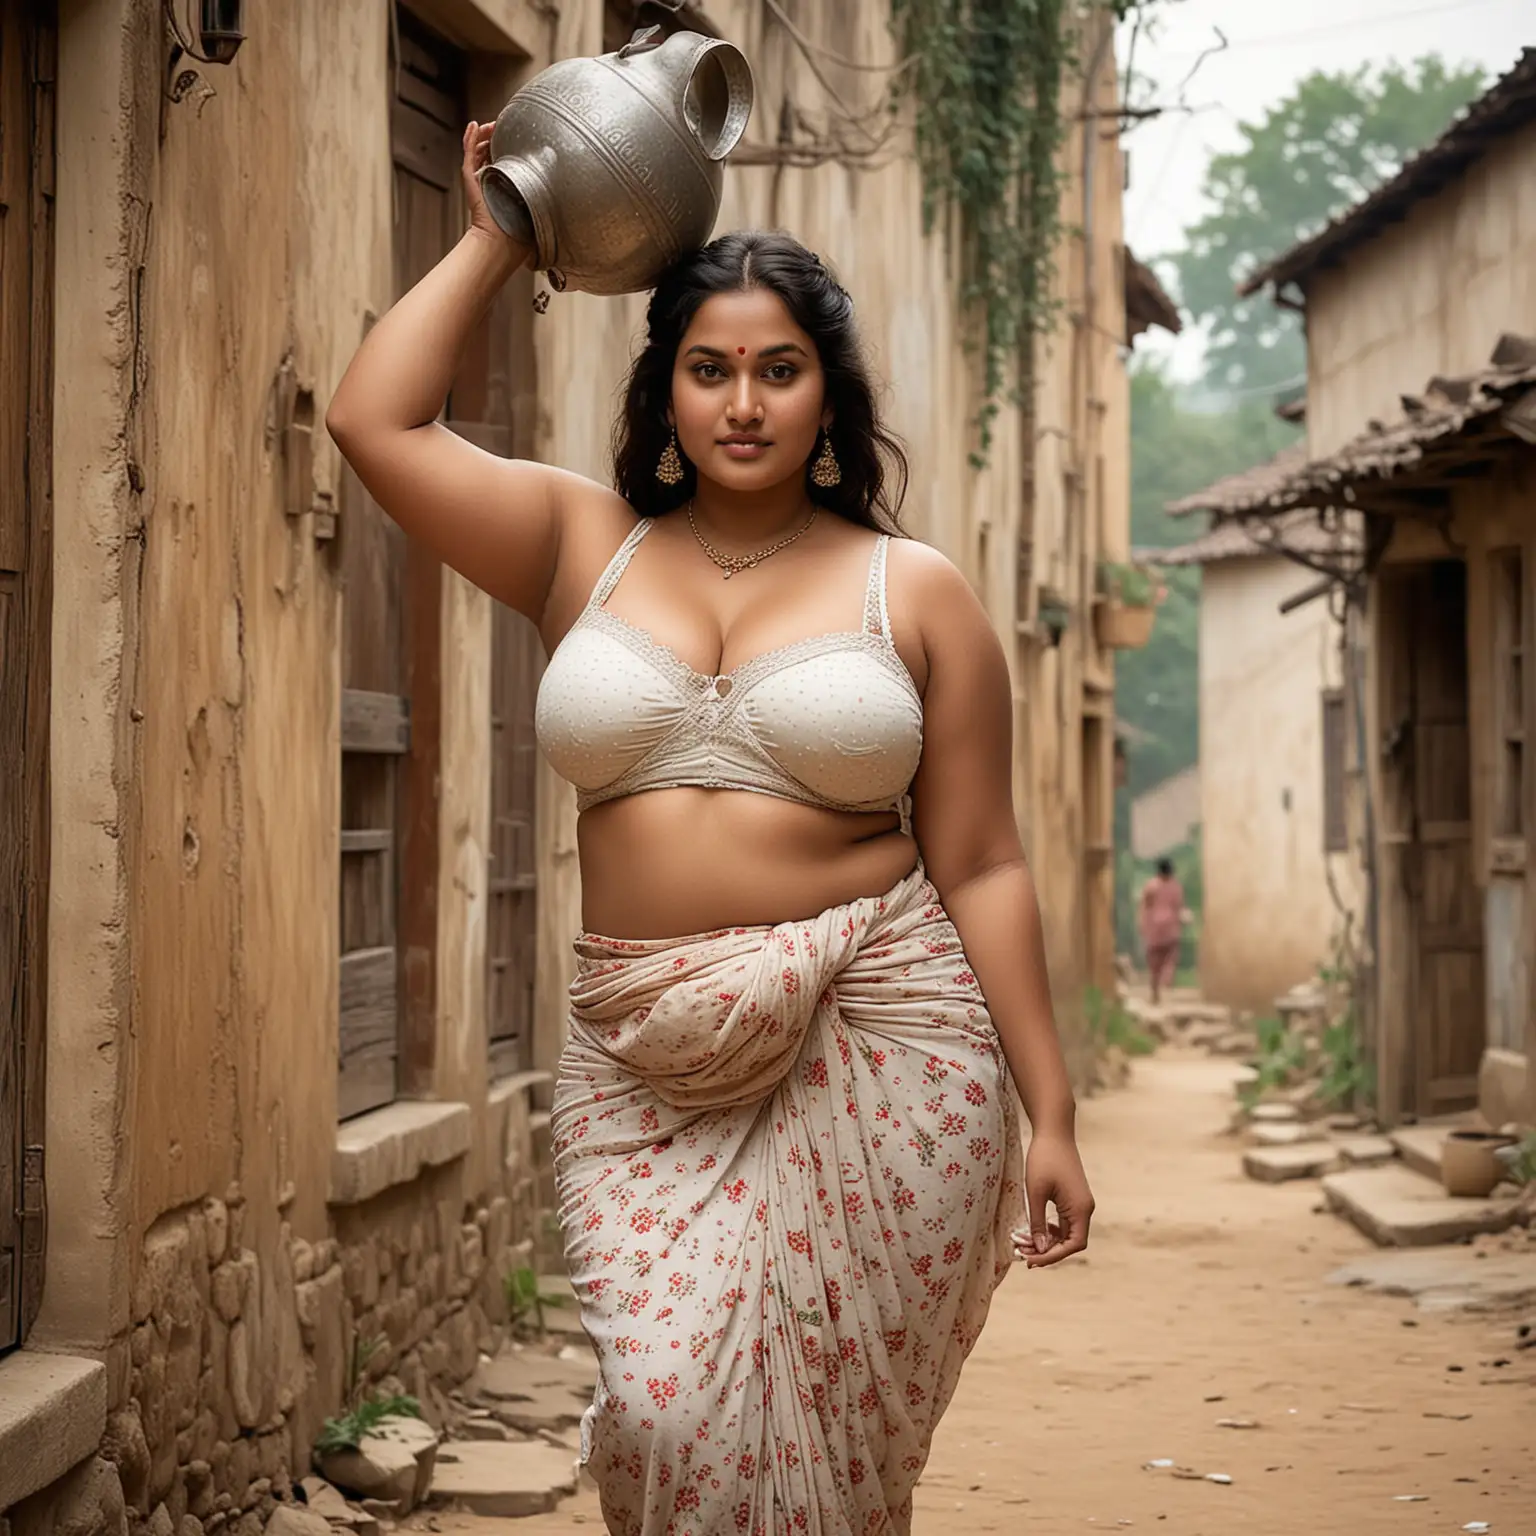 Voluptuous BBW Woman in Traditional Indian Garb Carrying Water Pitcher